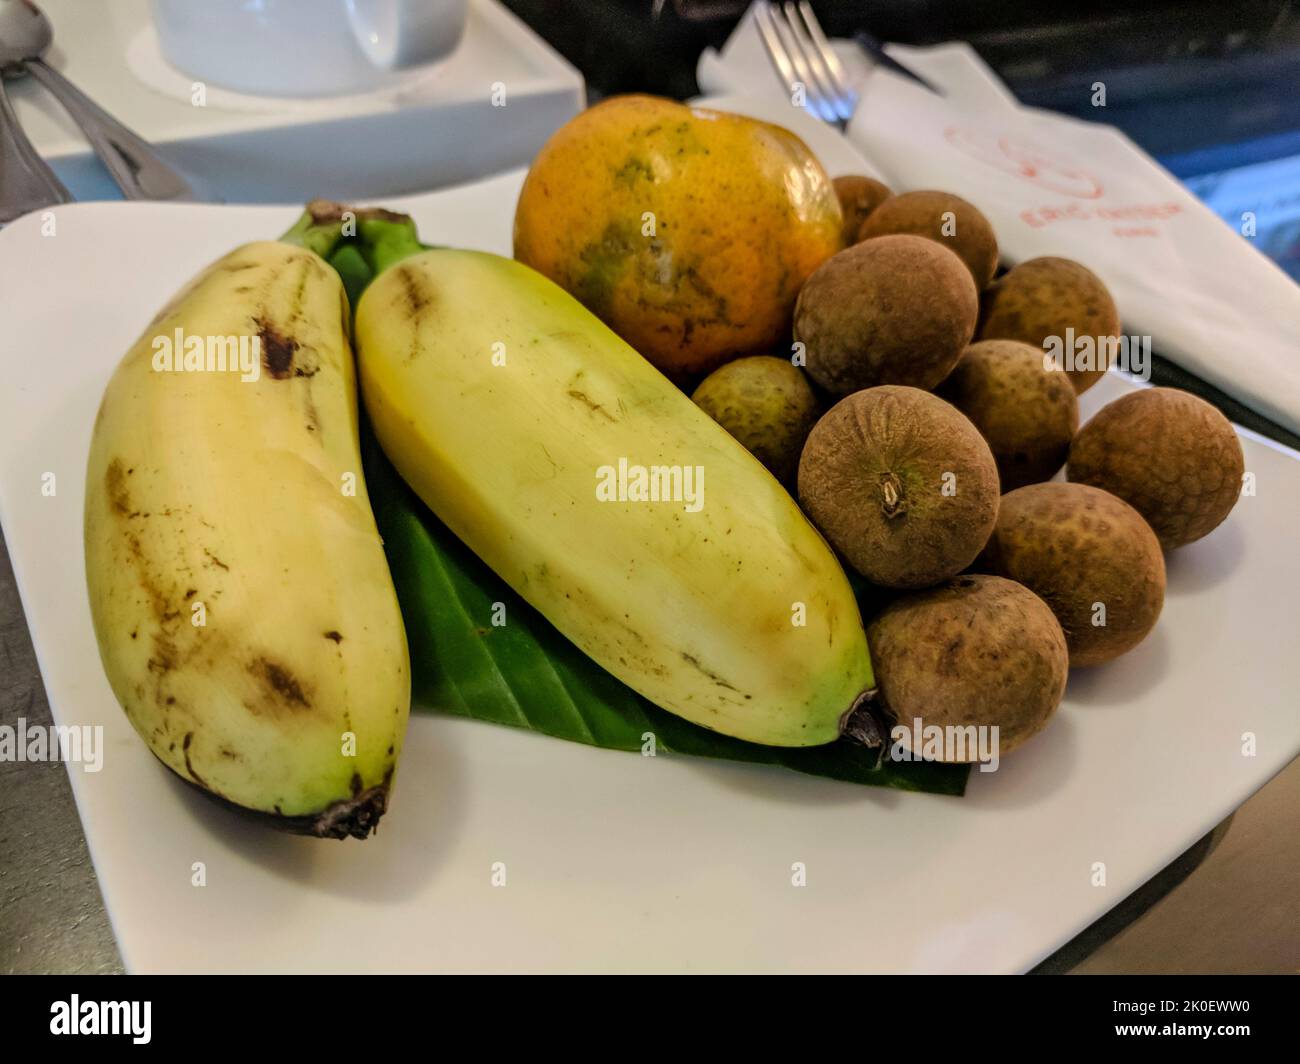 Plate with bananas, longan fruit and an orange in a hotel in Ho Chi Mihn City, Vietnam Stock Photo